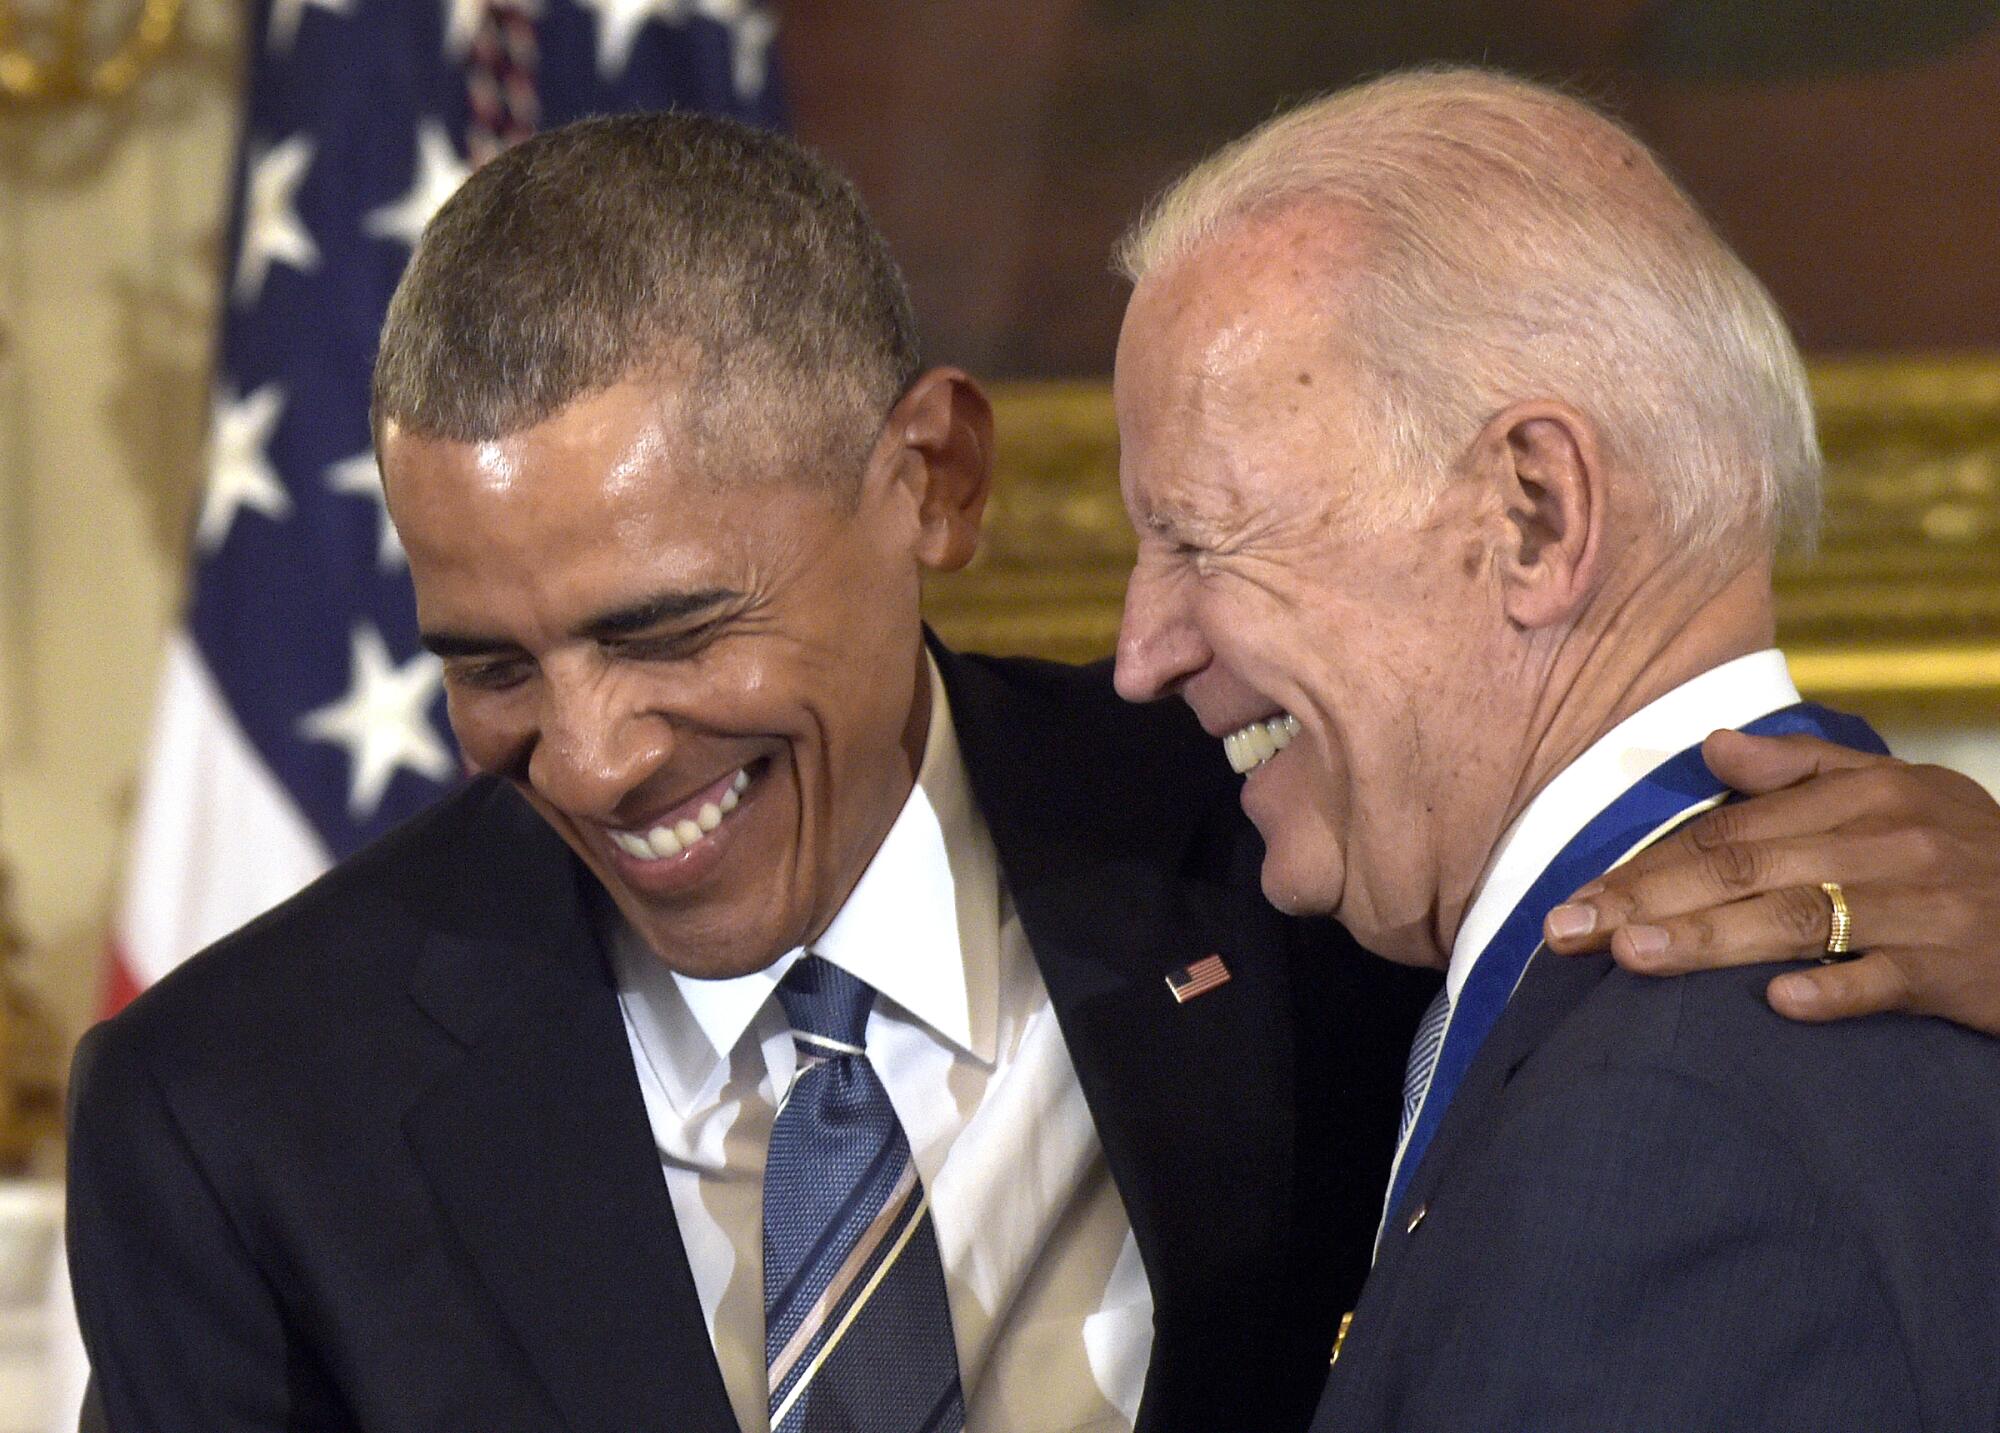 Biden laughs with President Obama, who was awarding him the Presidential Medal of Freedom with Distinction, in 2017.